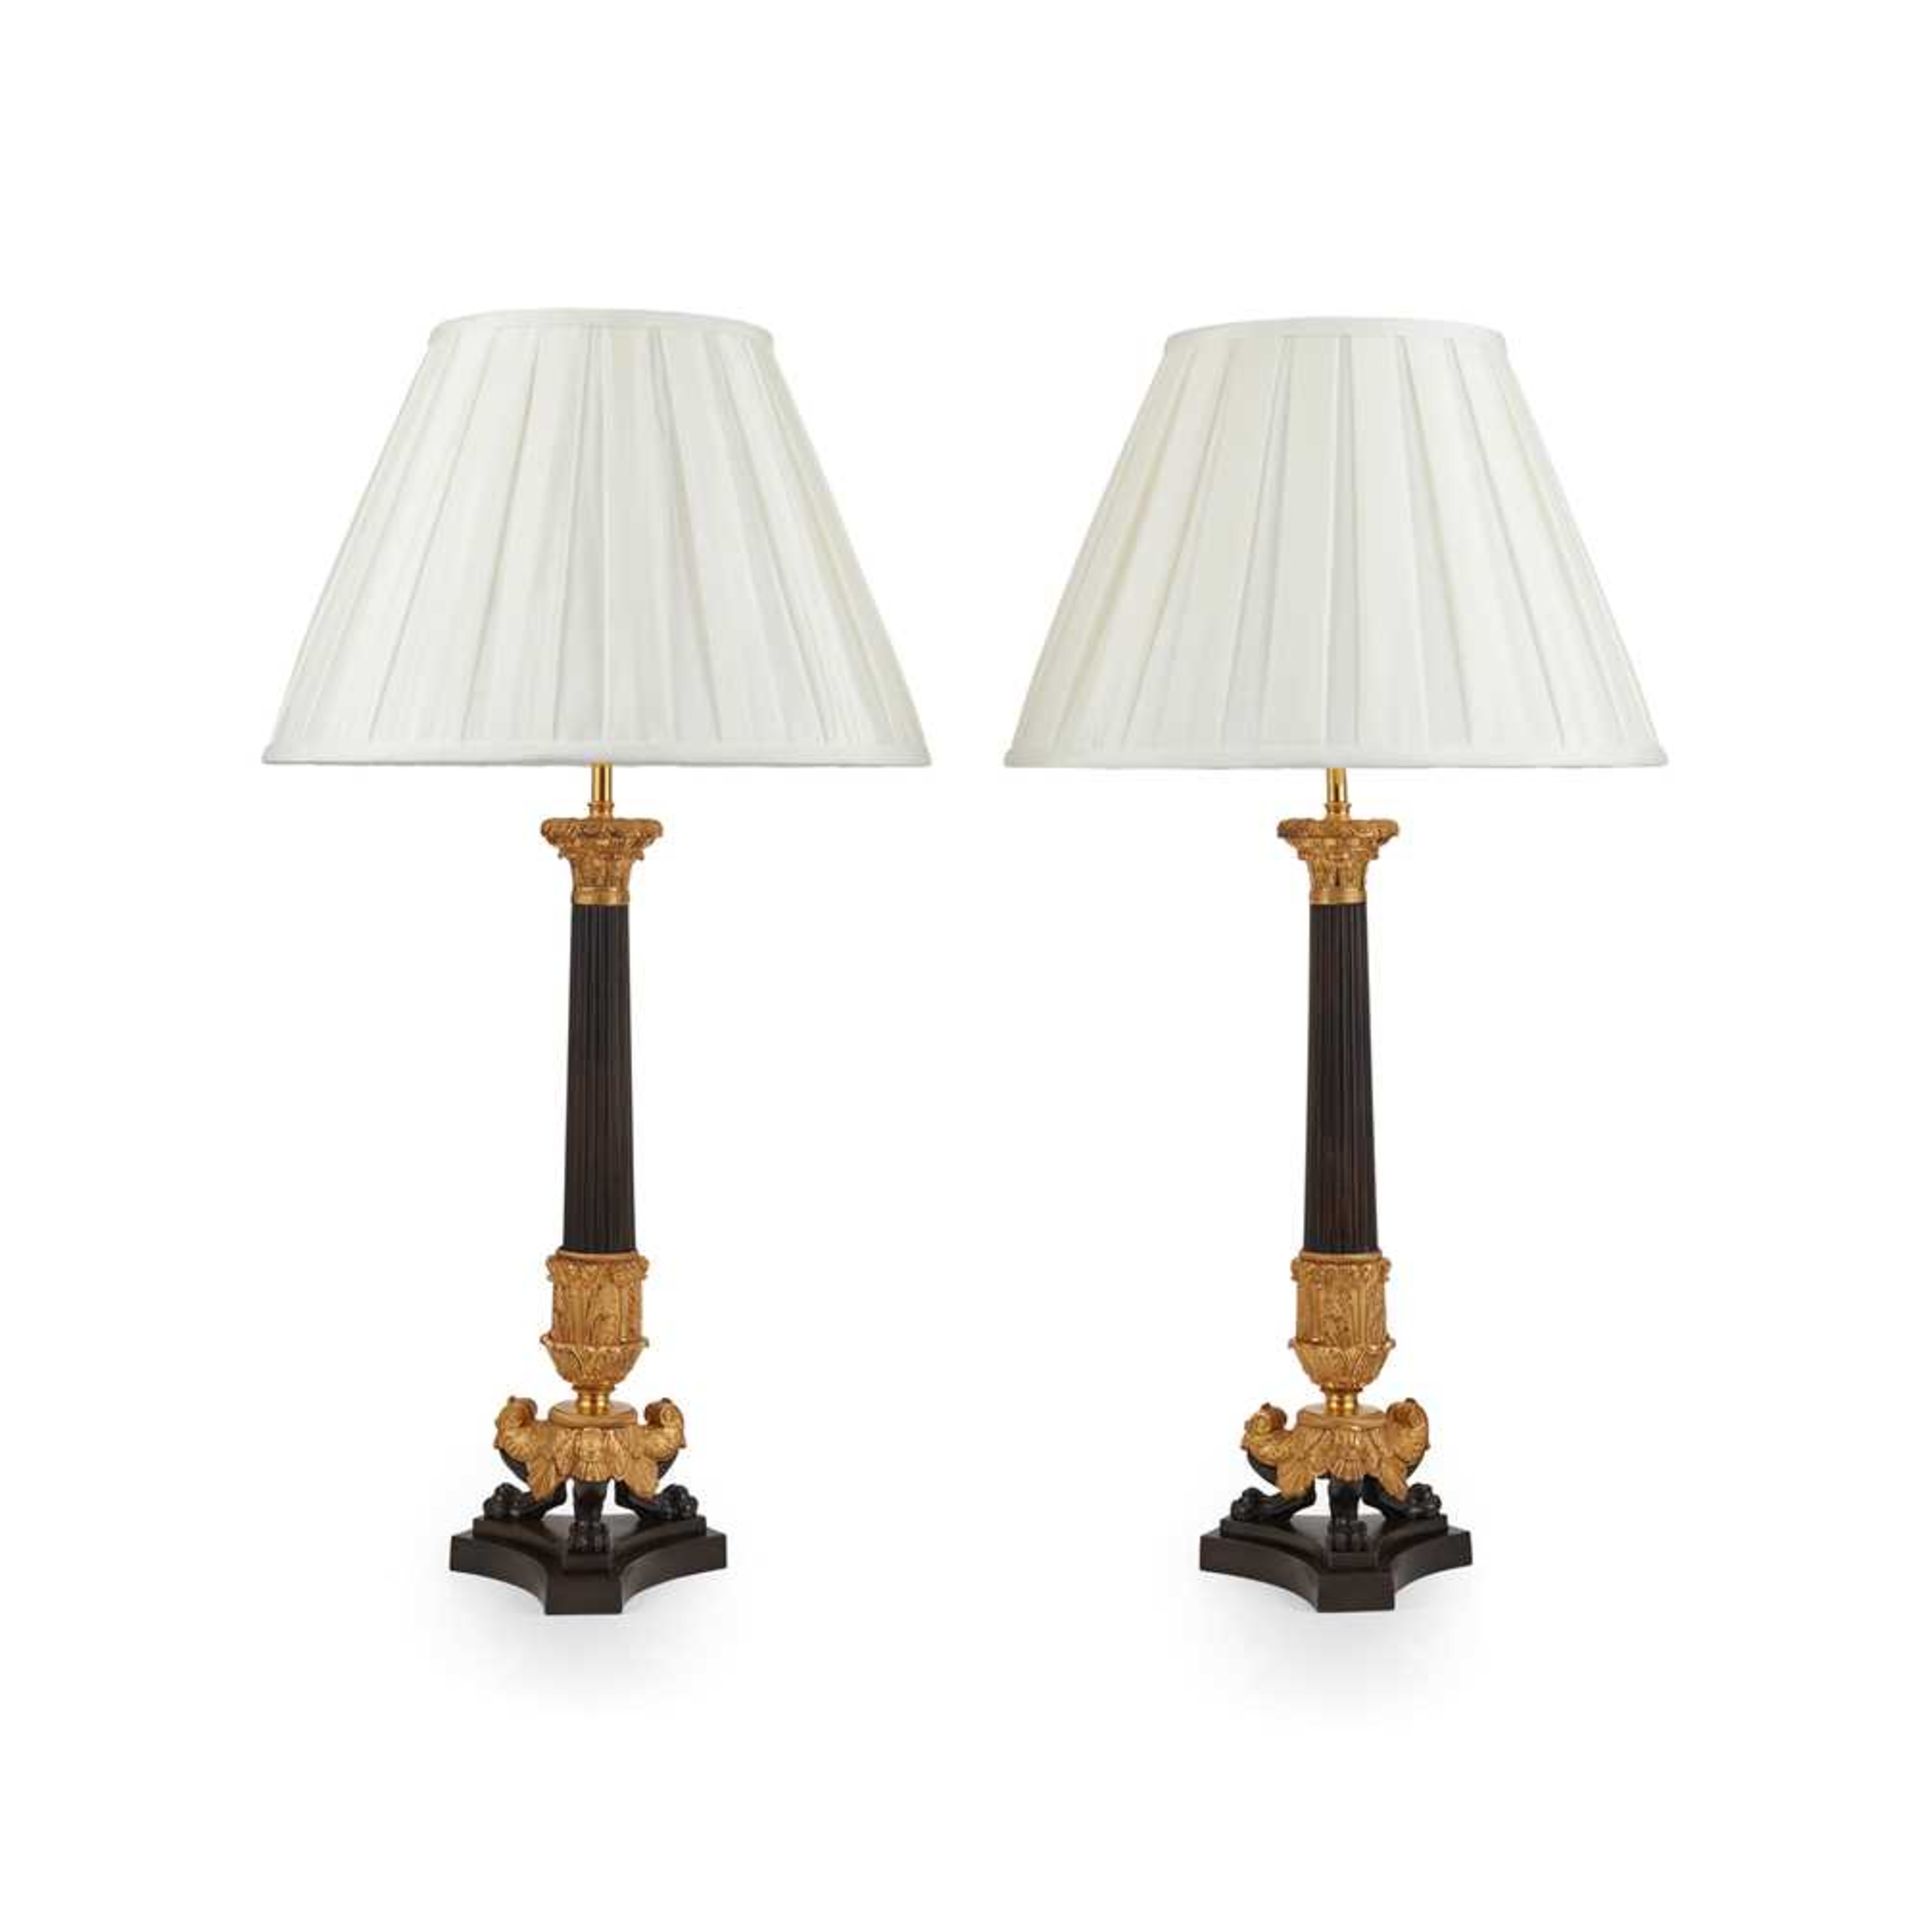 PAIR OF LARGE REGENCY PATINATED AND GILT BRONZE LAMPS EARLY 19TH CENTURY